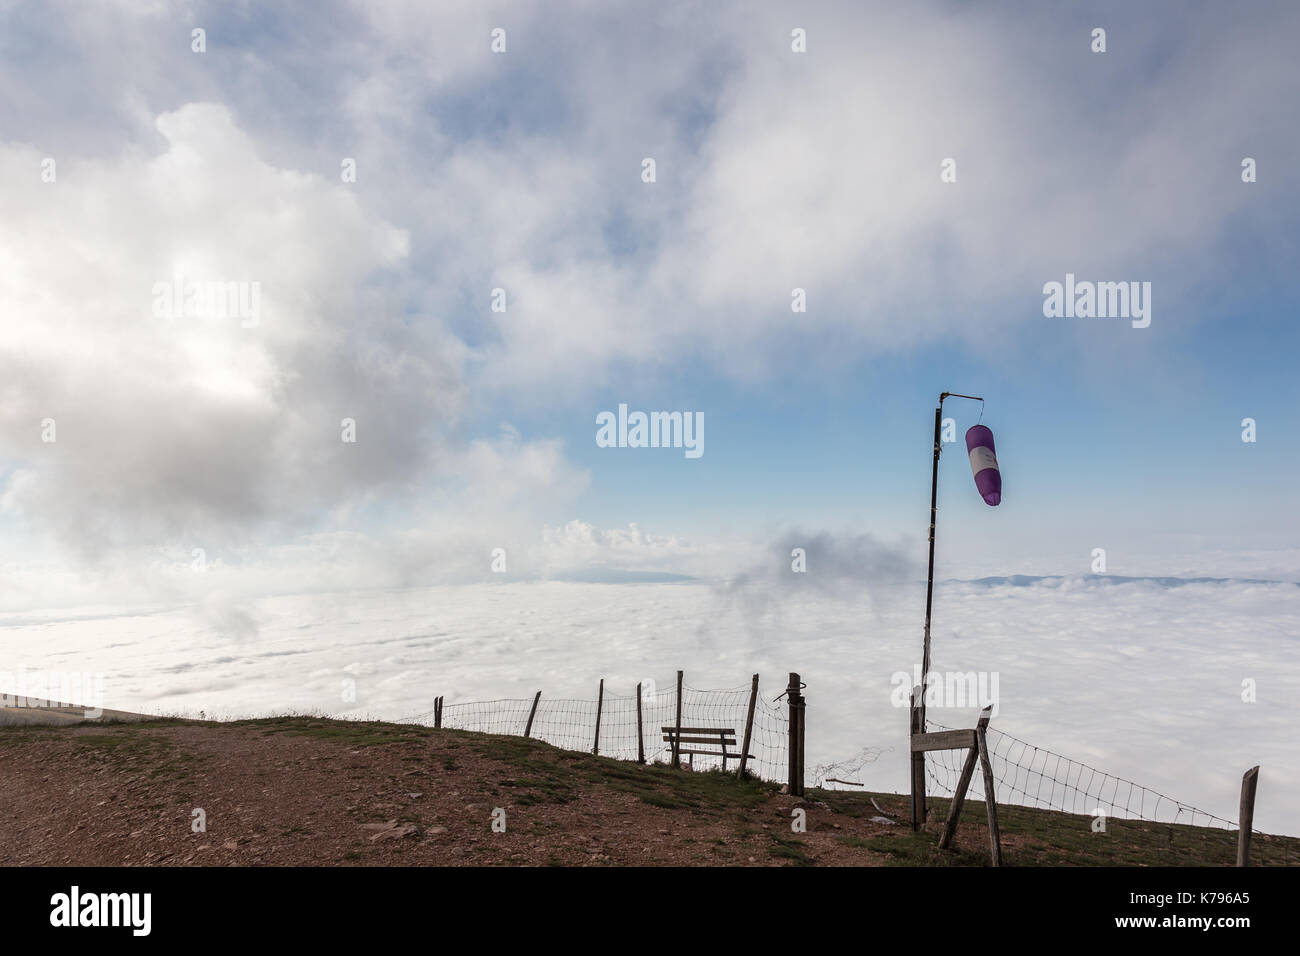 A mountain top over a valley filled by fog, with very low clouds, fence and a windswept windsock Stock Photo